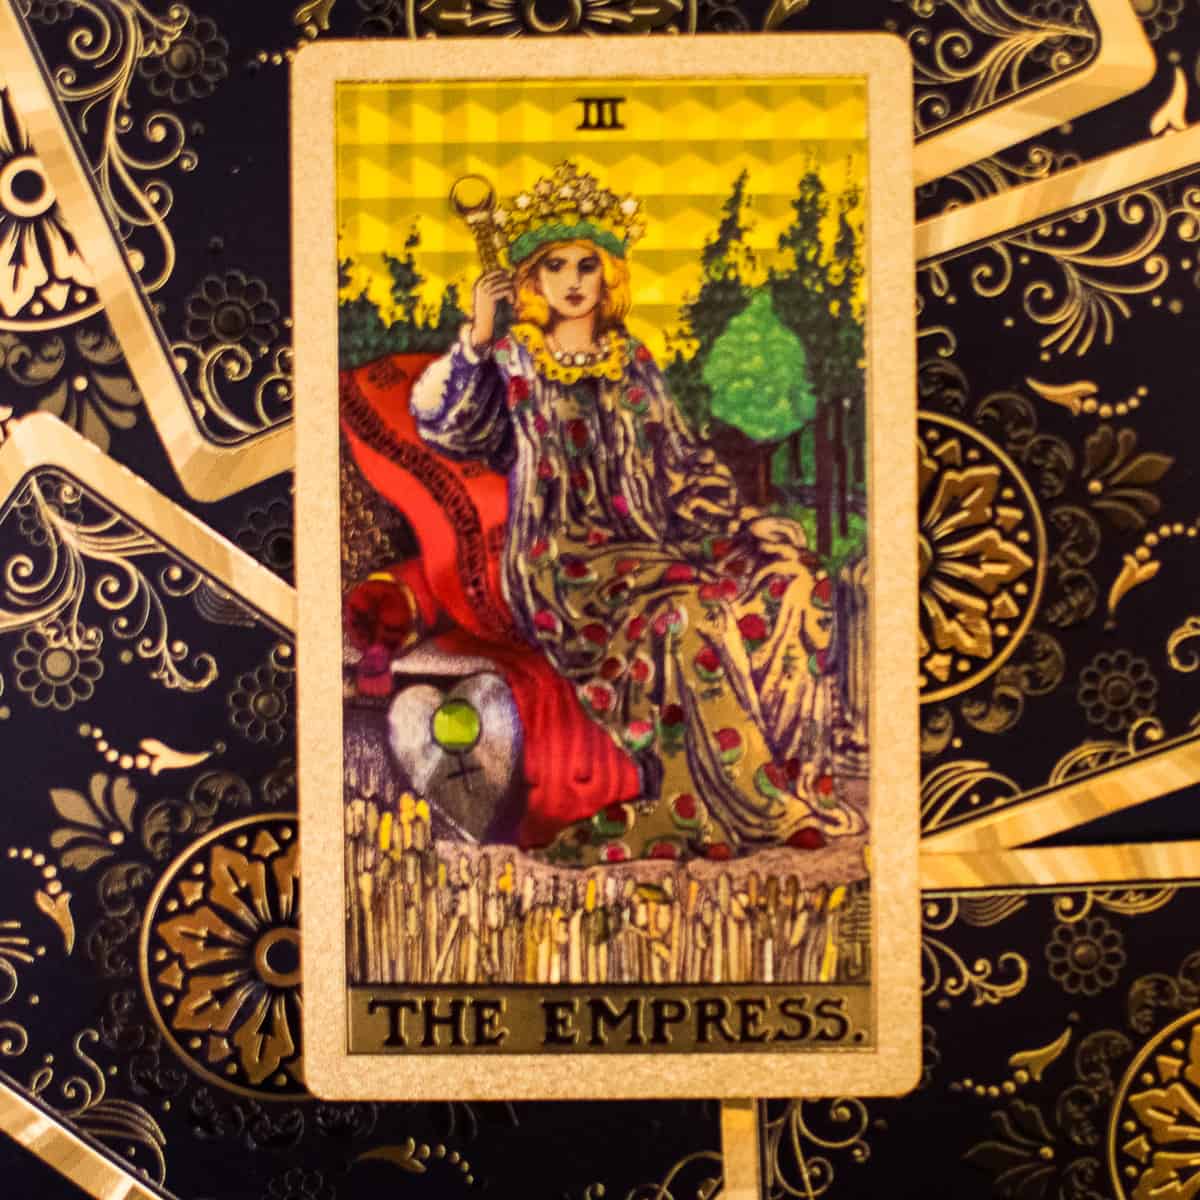 An Empress on her throne as depicted on a tarot card.